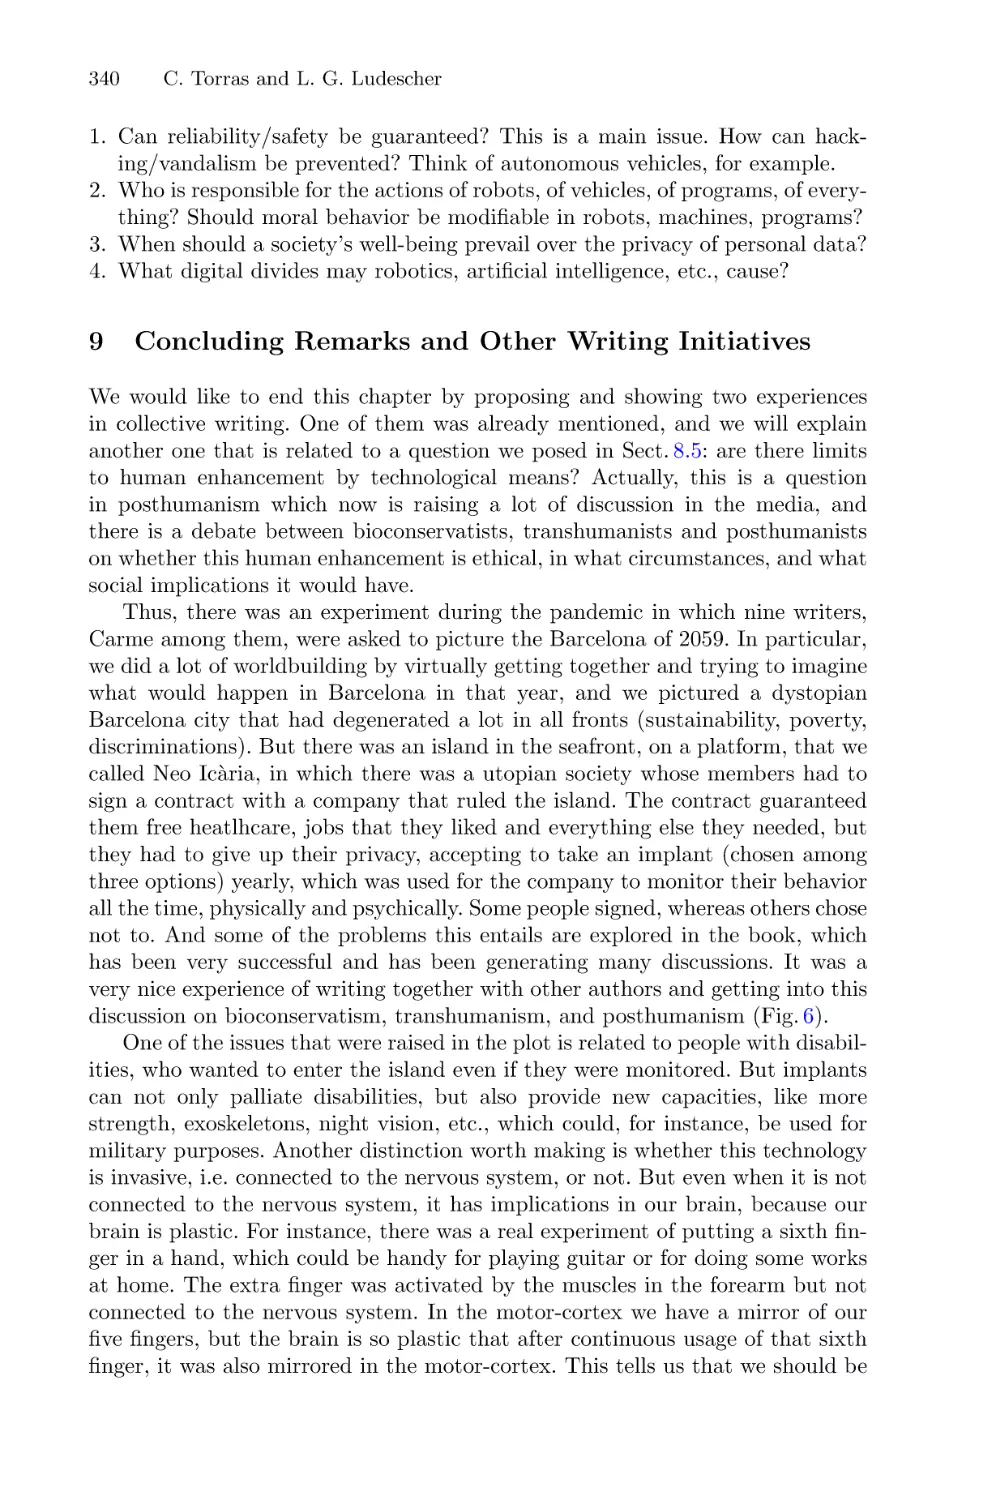 9 Concluding Remarks and Other Writing Initiatives